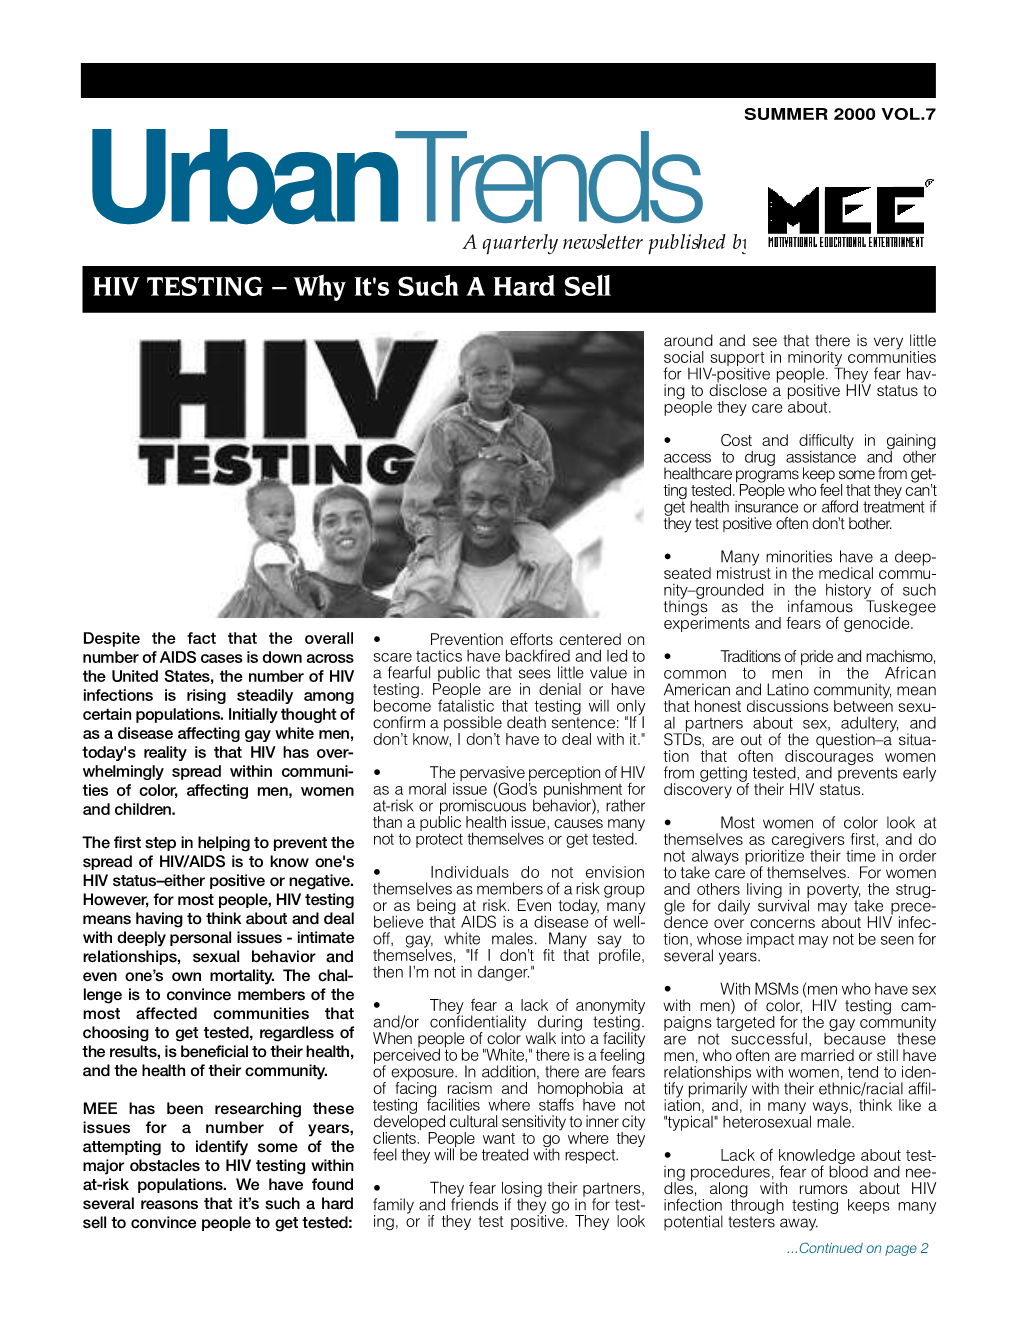 HIV TESTING – Why It's Such a Hard Sell